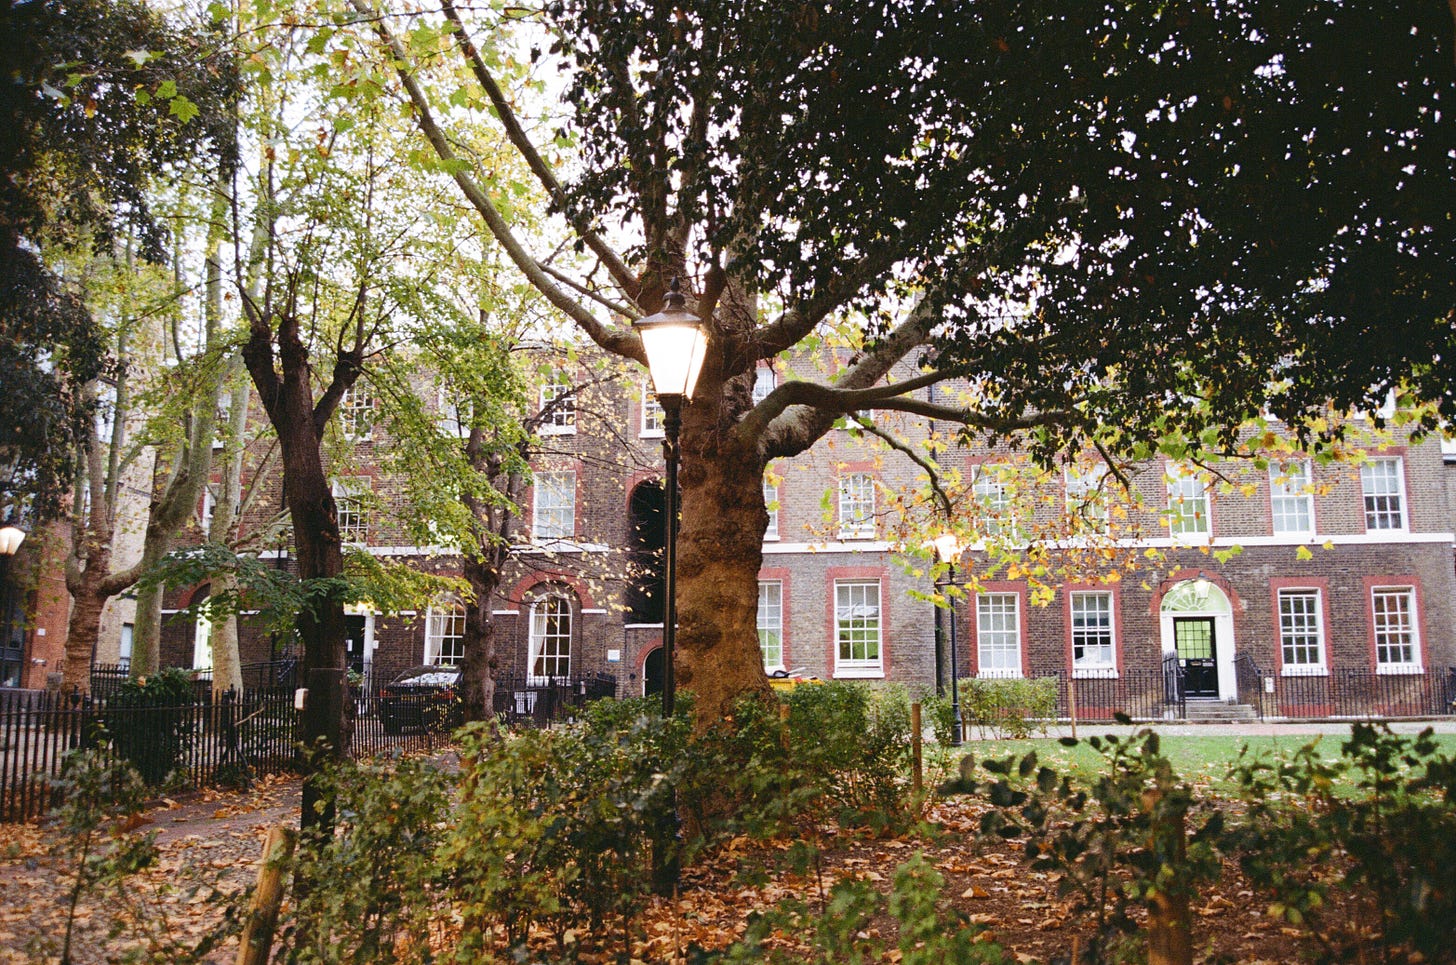 A row of Georgian buildings in brown and red brick in Camberwell, surrounded by trees, autumn leaves and an old-fashioned lamppost.